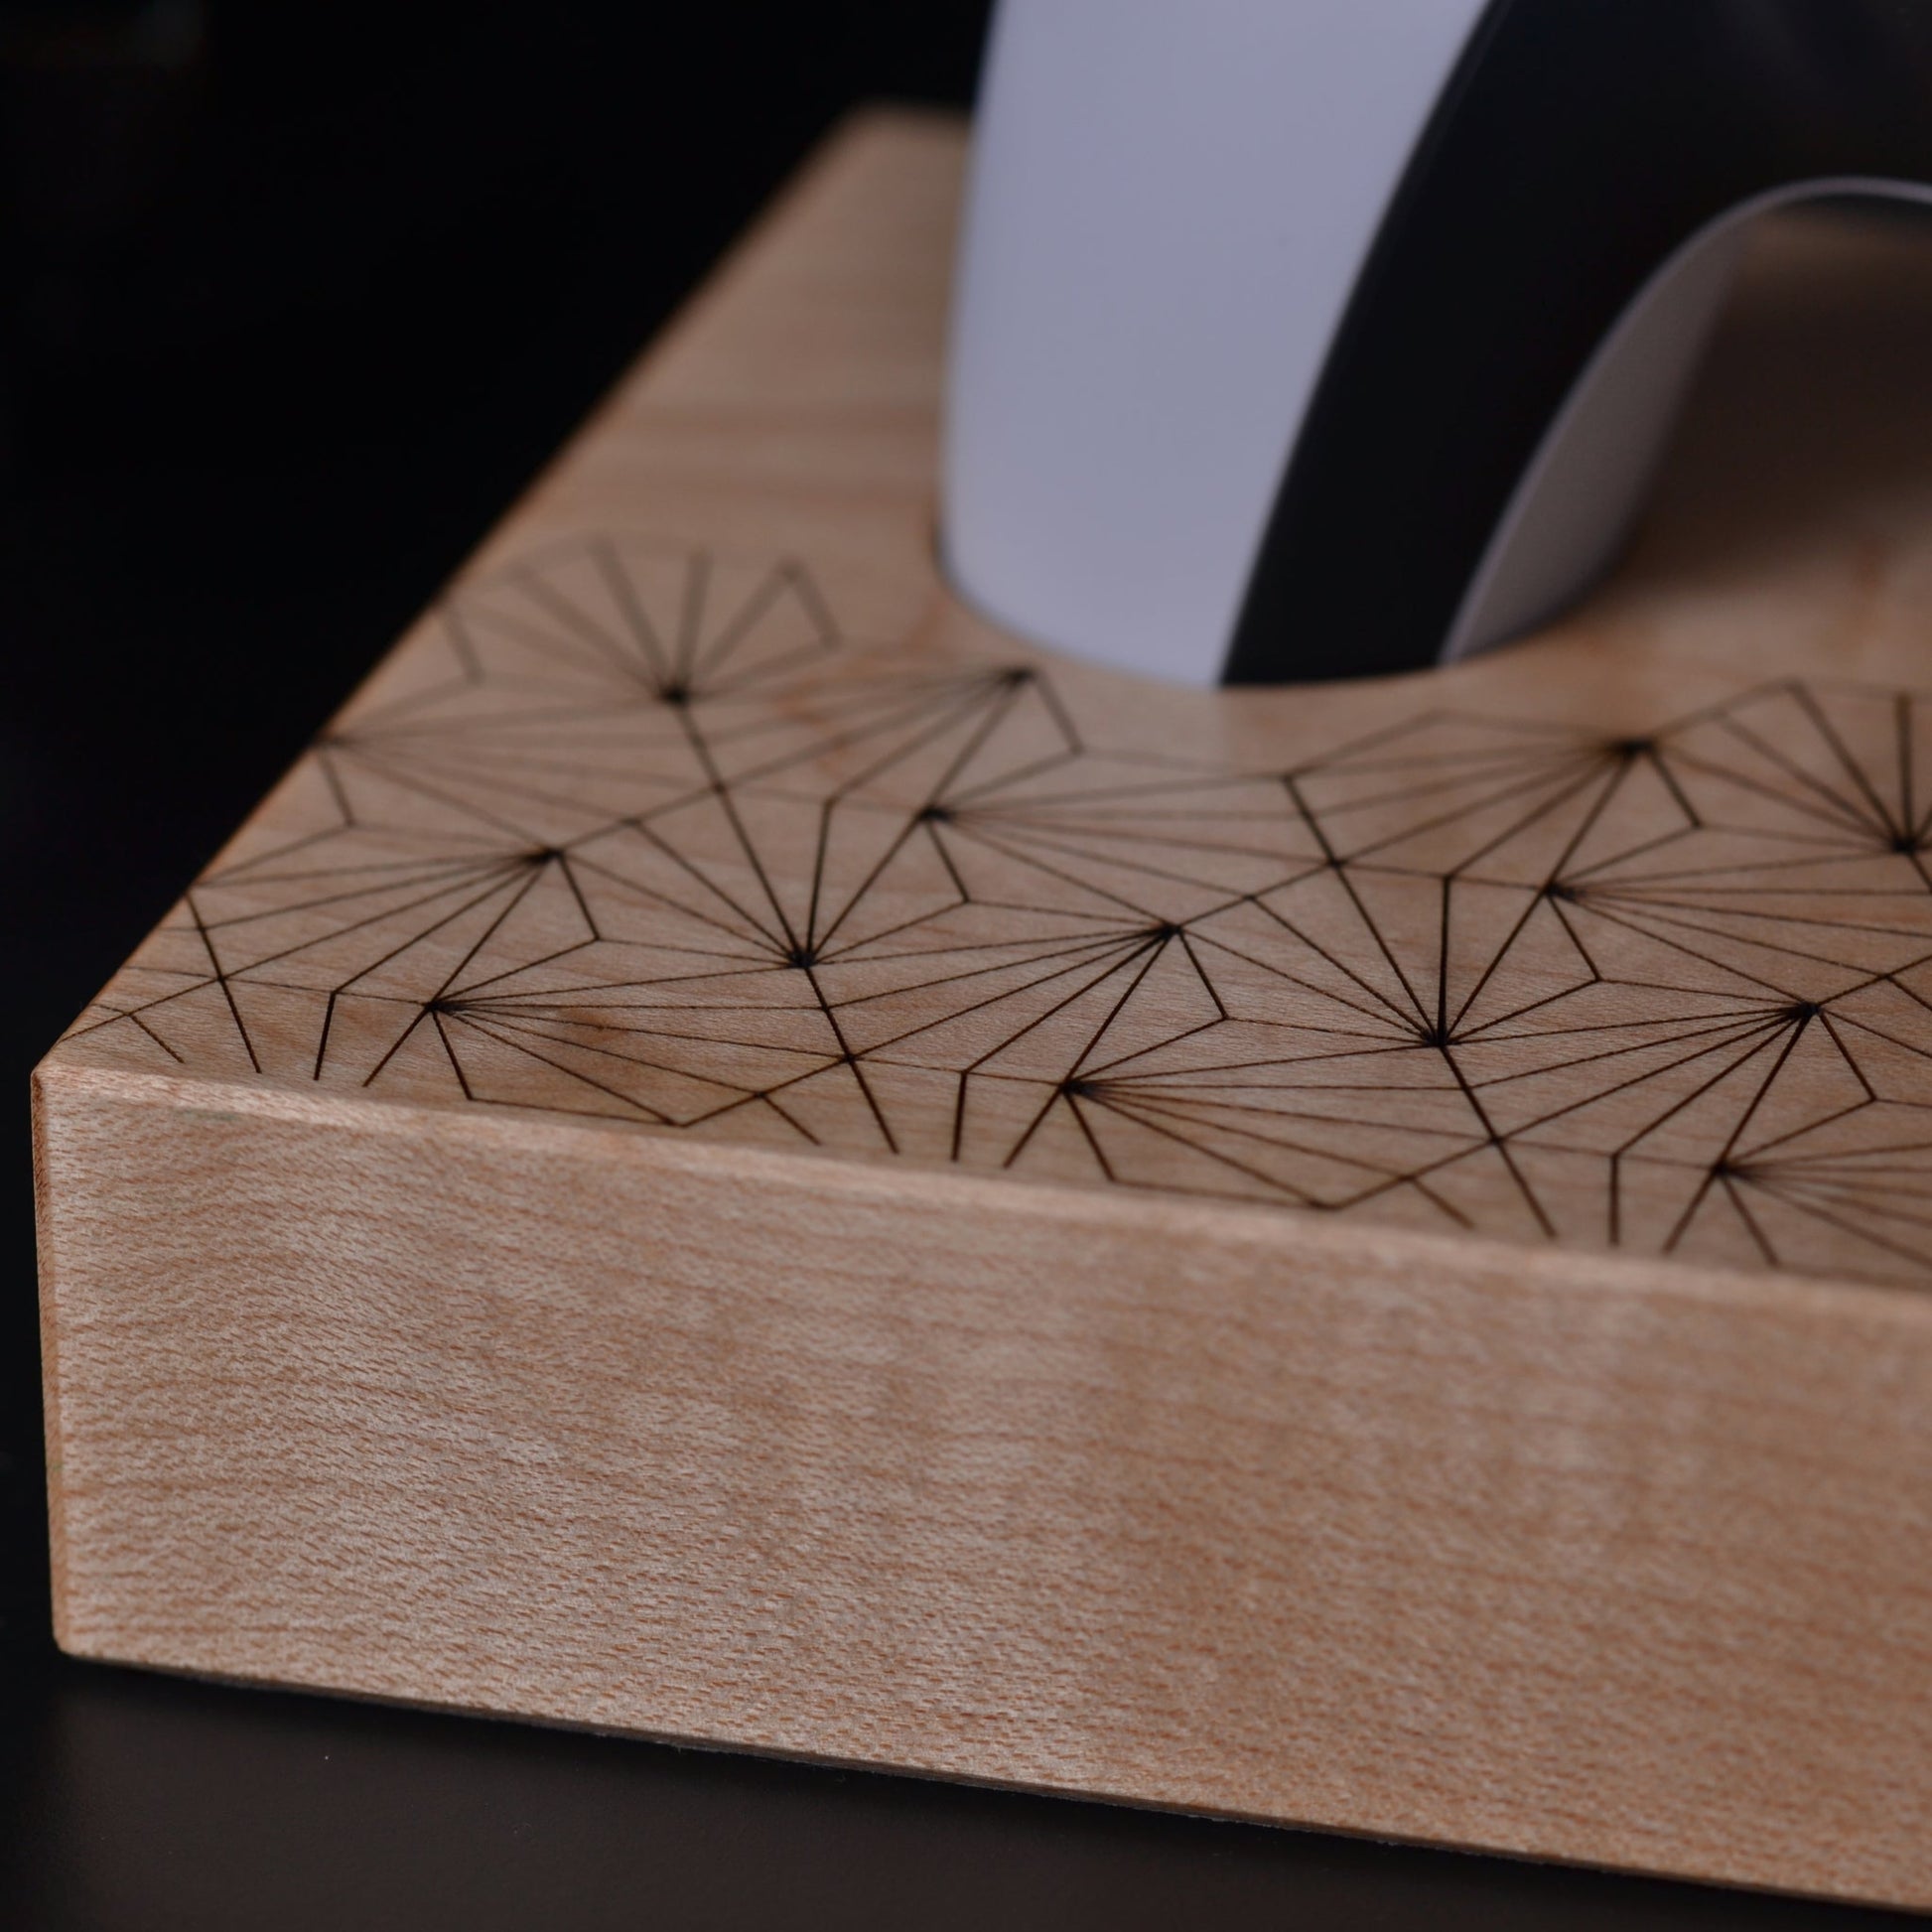 Close up detail shot of wooden stand with geometric pattern for Playstation 5 dualsense controller